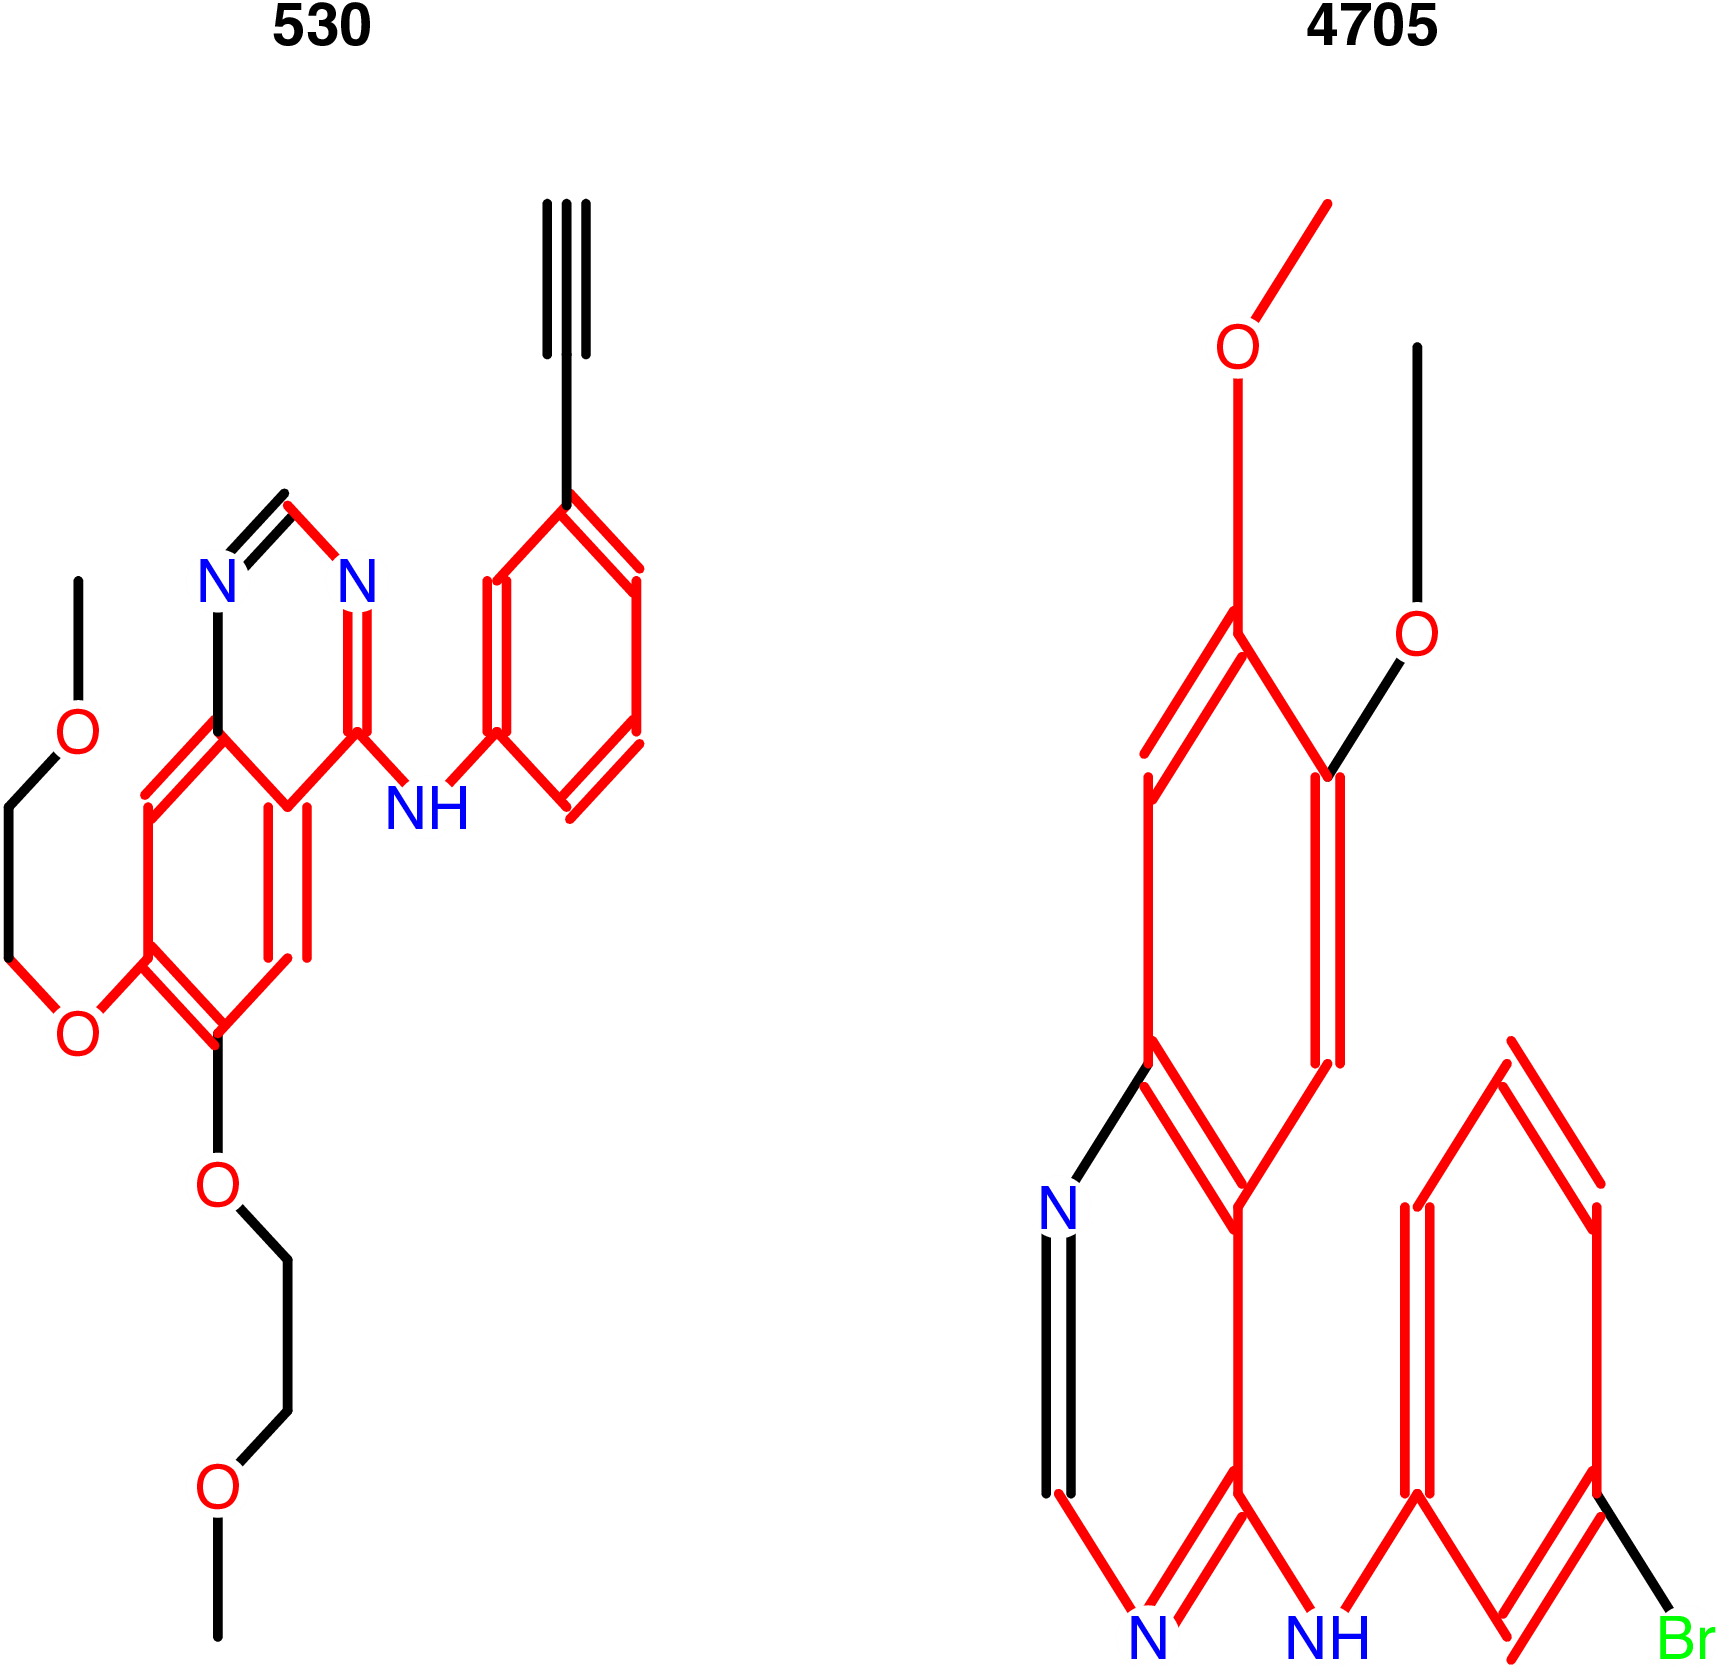 Figure 6: Maximum common structure of the query molecule and the #92 molecule in the chemical database.